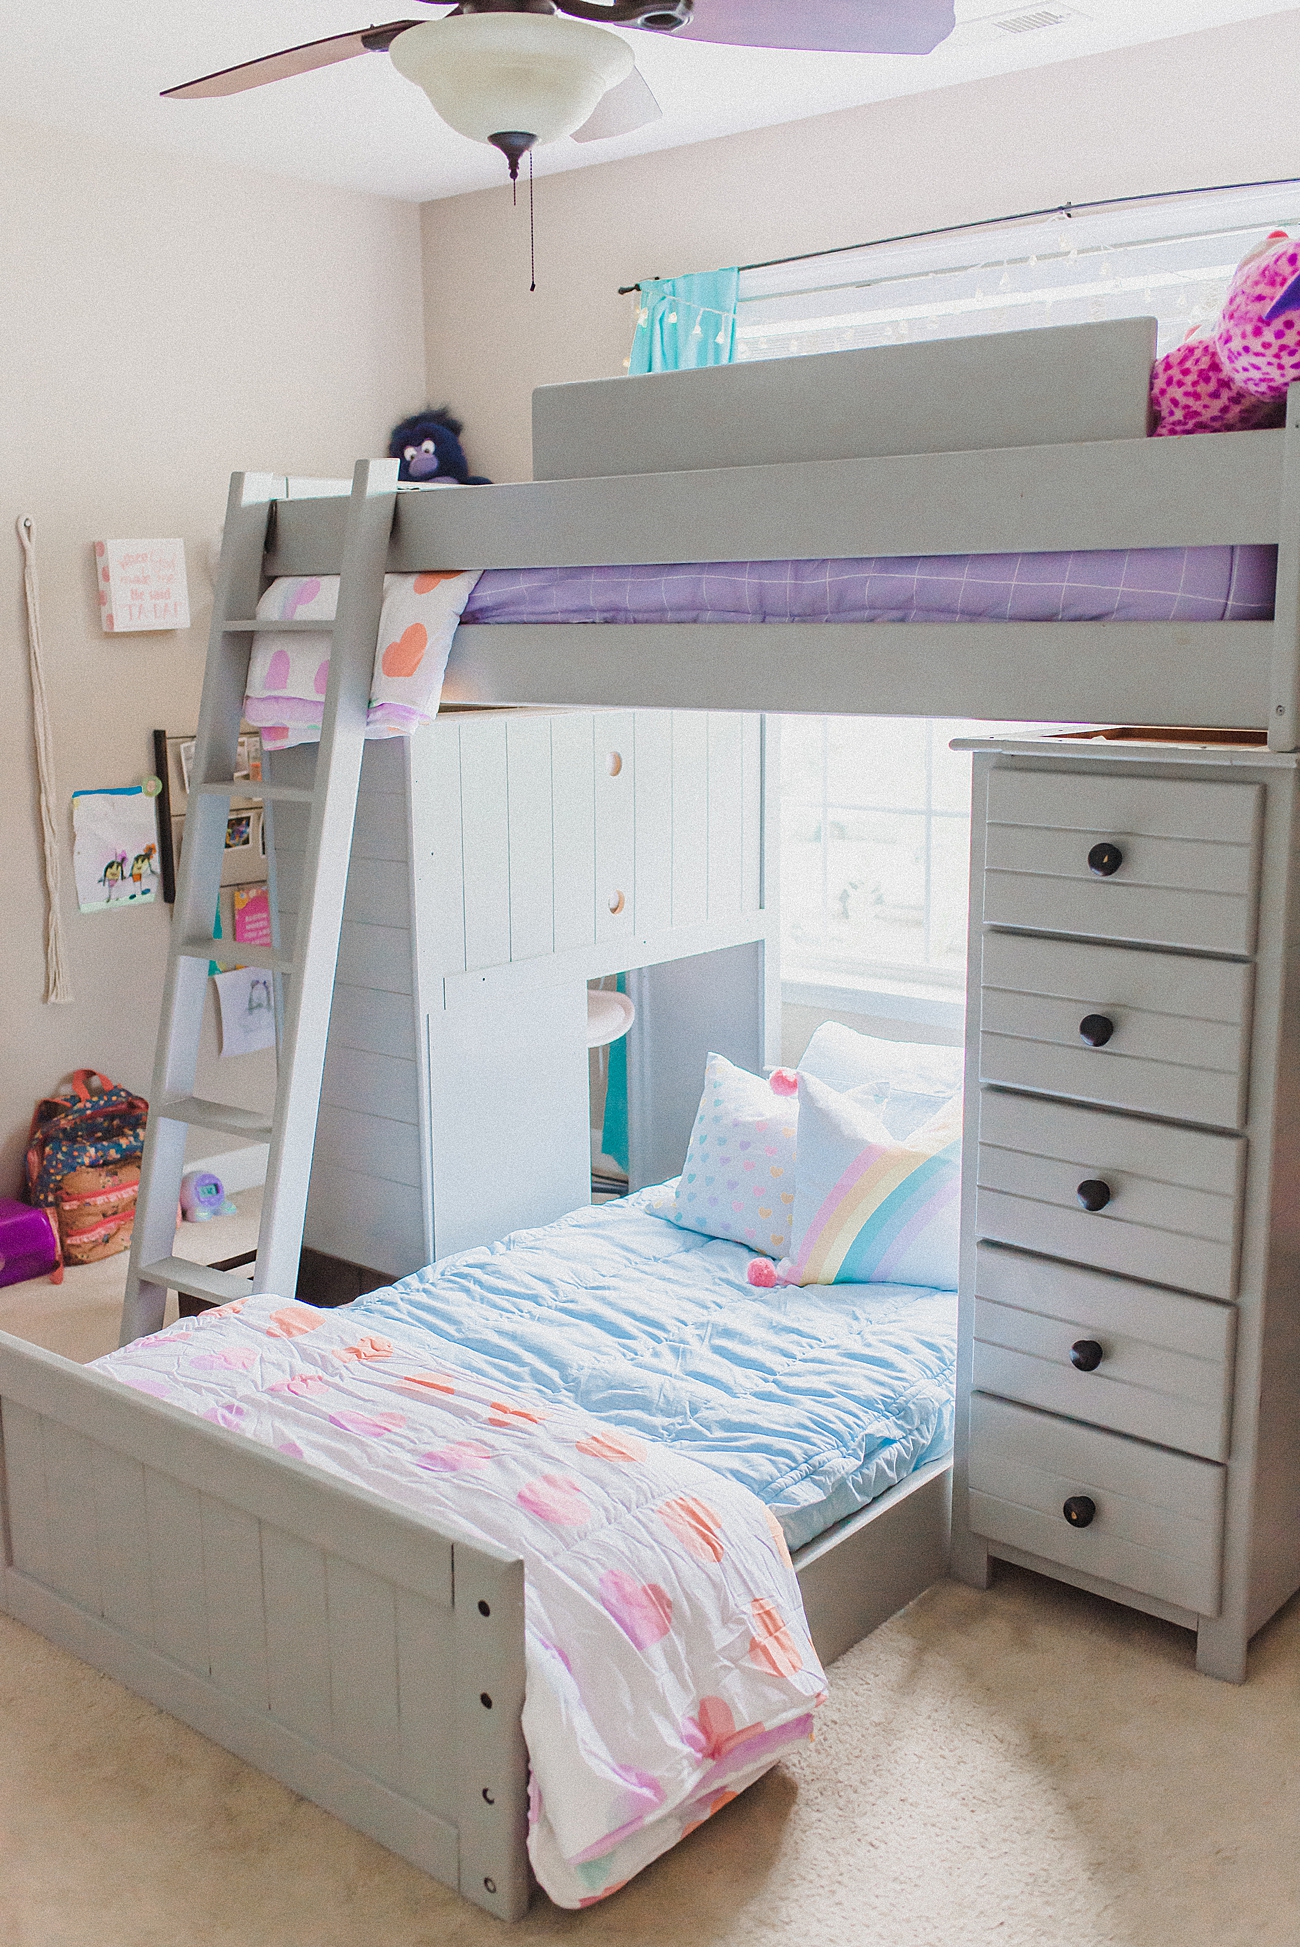 The Best Bedding For Bunk Beds Beddy, Bunk Bed Zipper Bedding